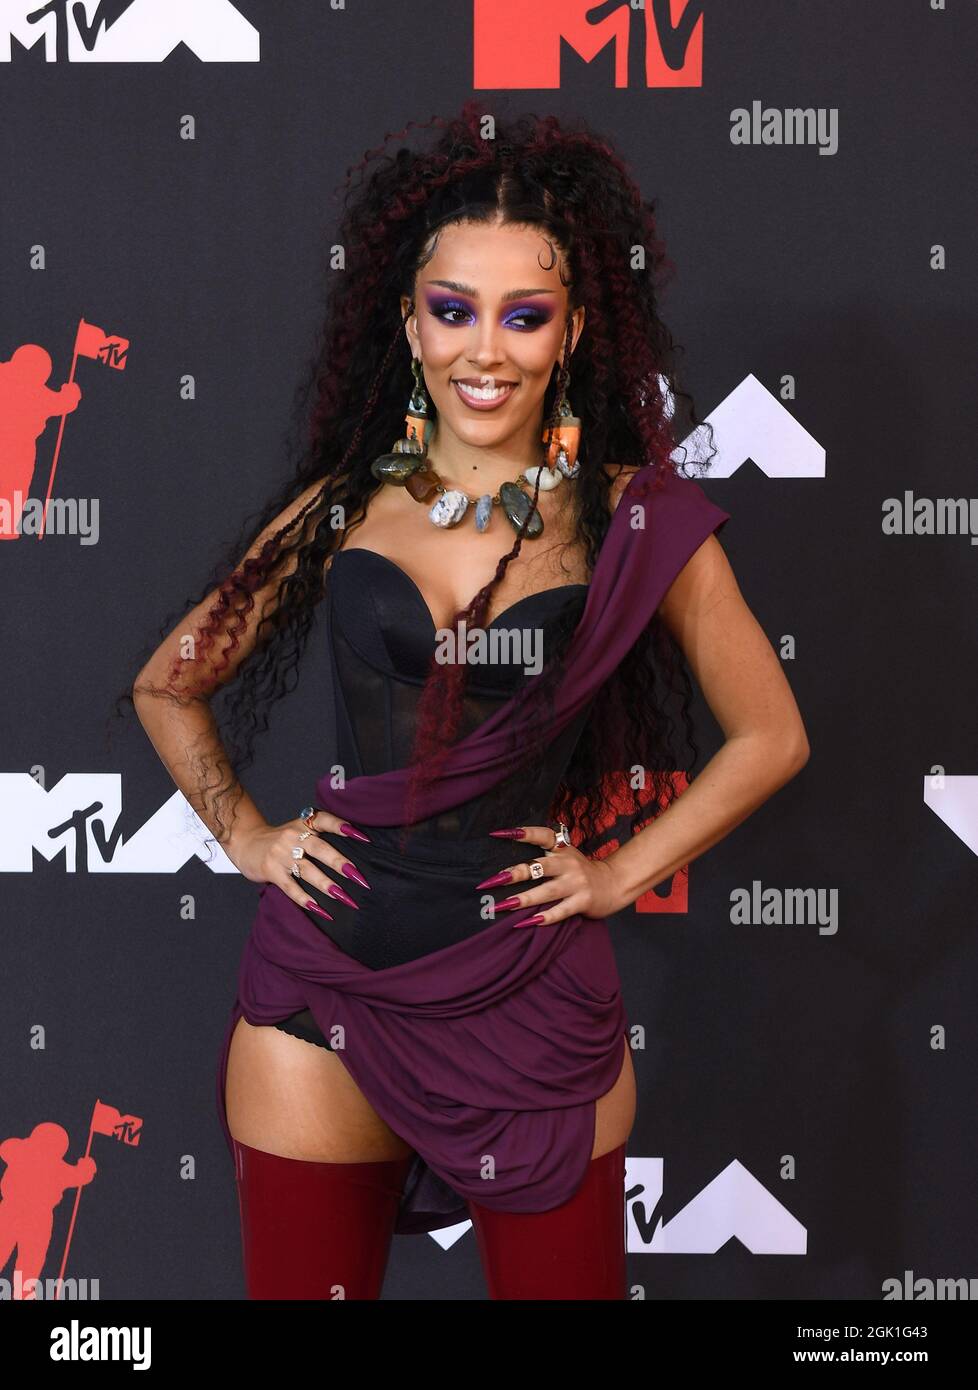 Doja Cat attends the 2021 MTV Video Music Awards at Barclays Center on